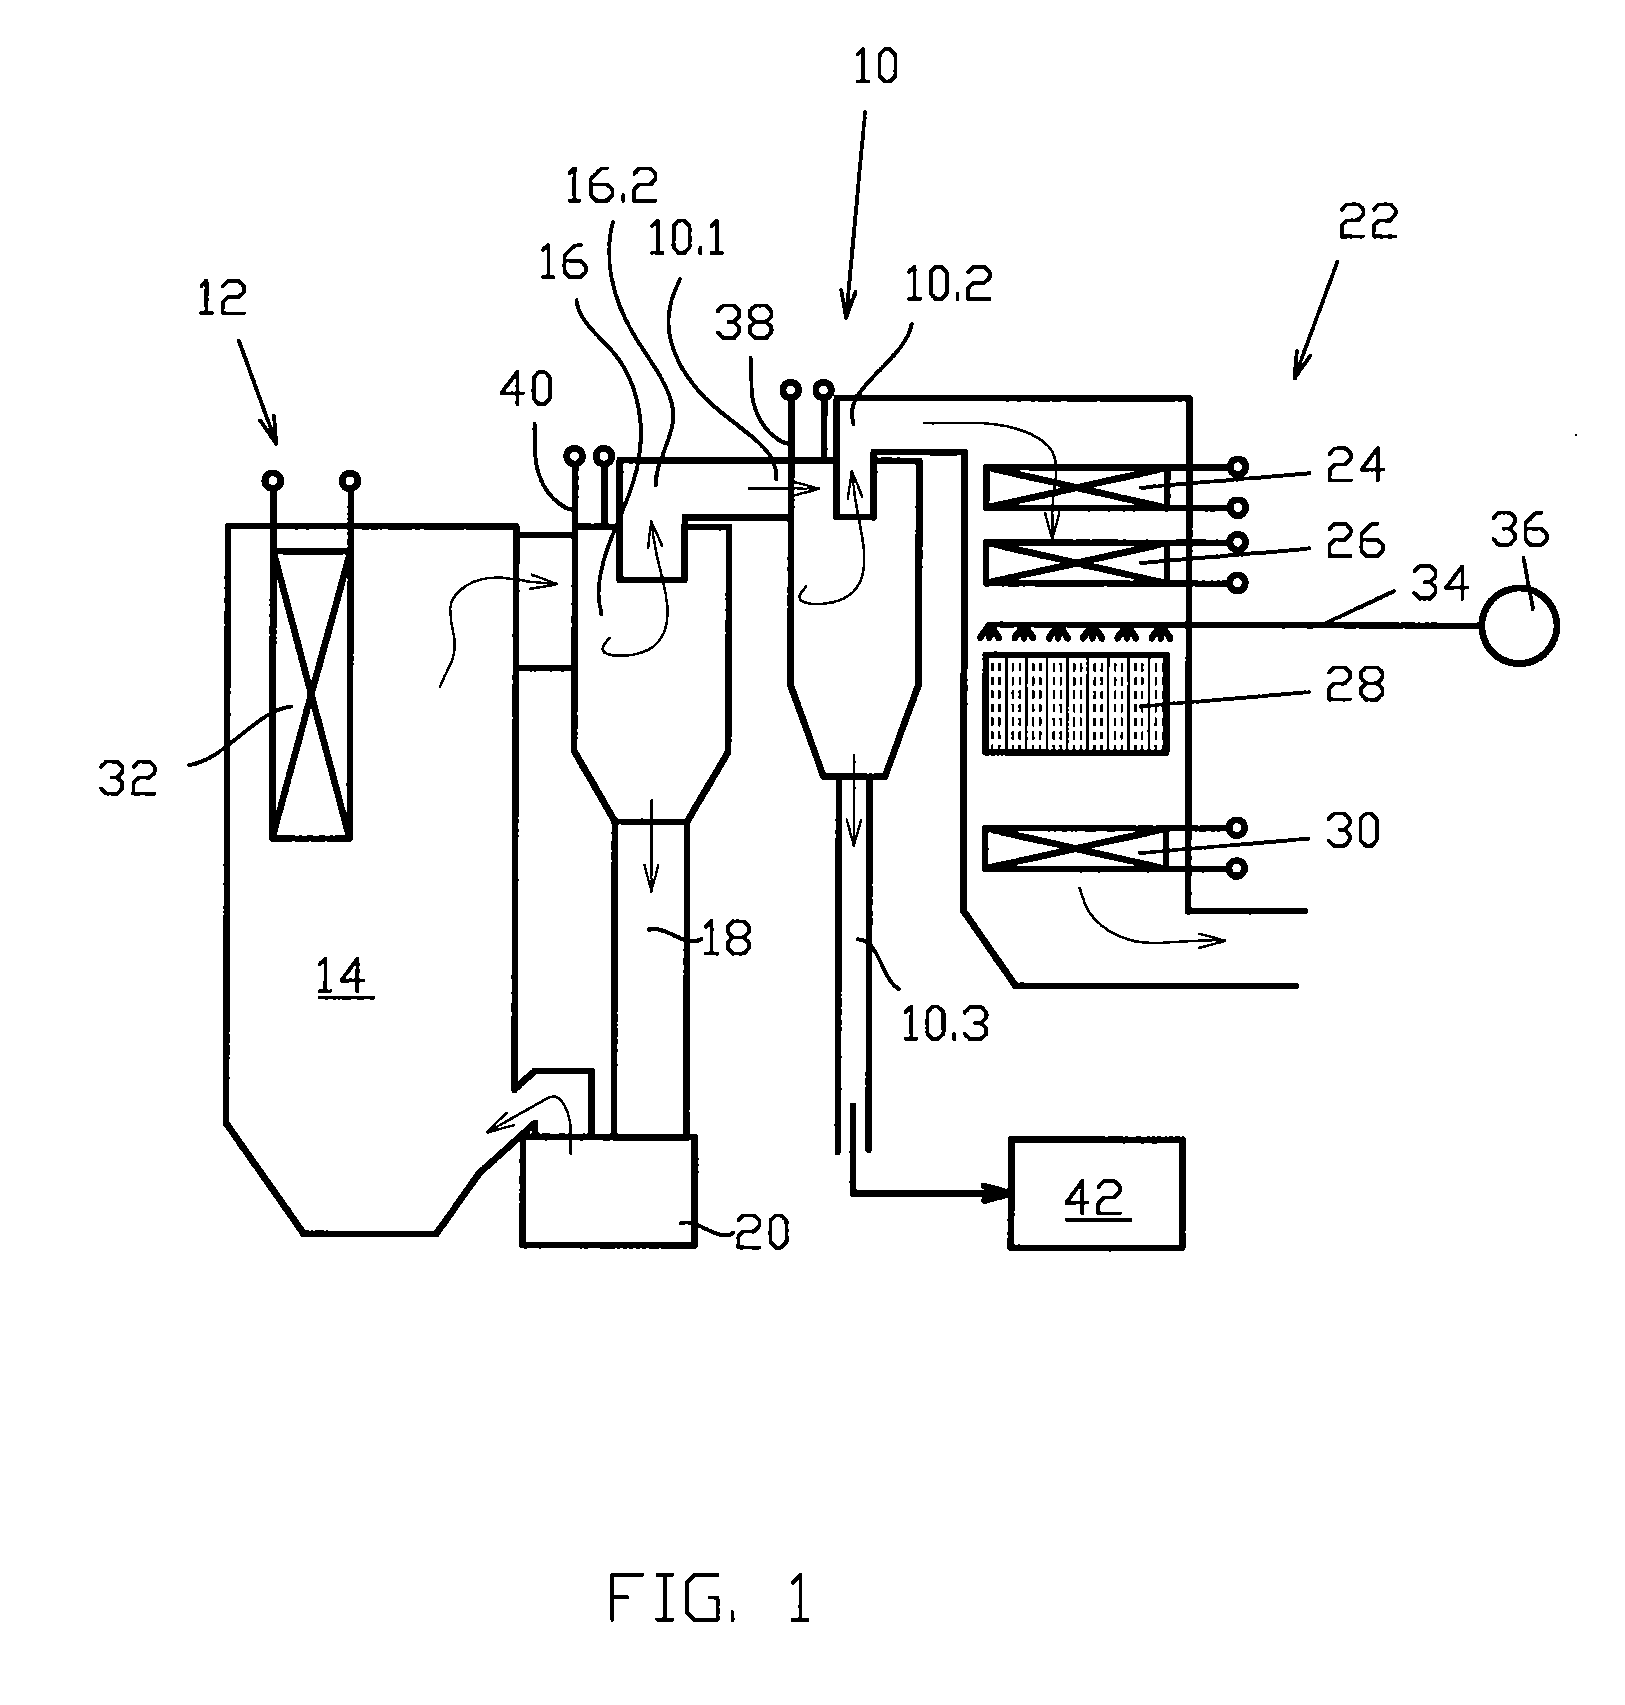 Circulating Fluidized Bed Combustor and a Method of Operating a Circulating Fluidized Bed Combustor